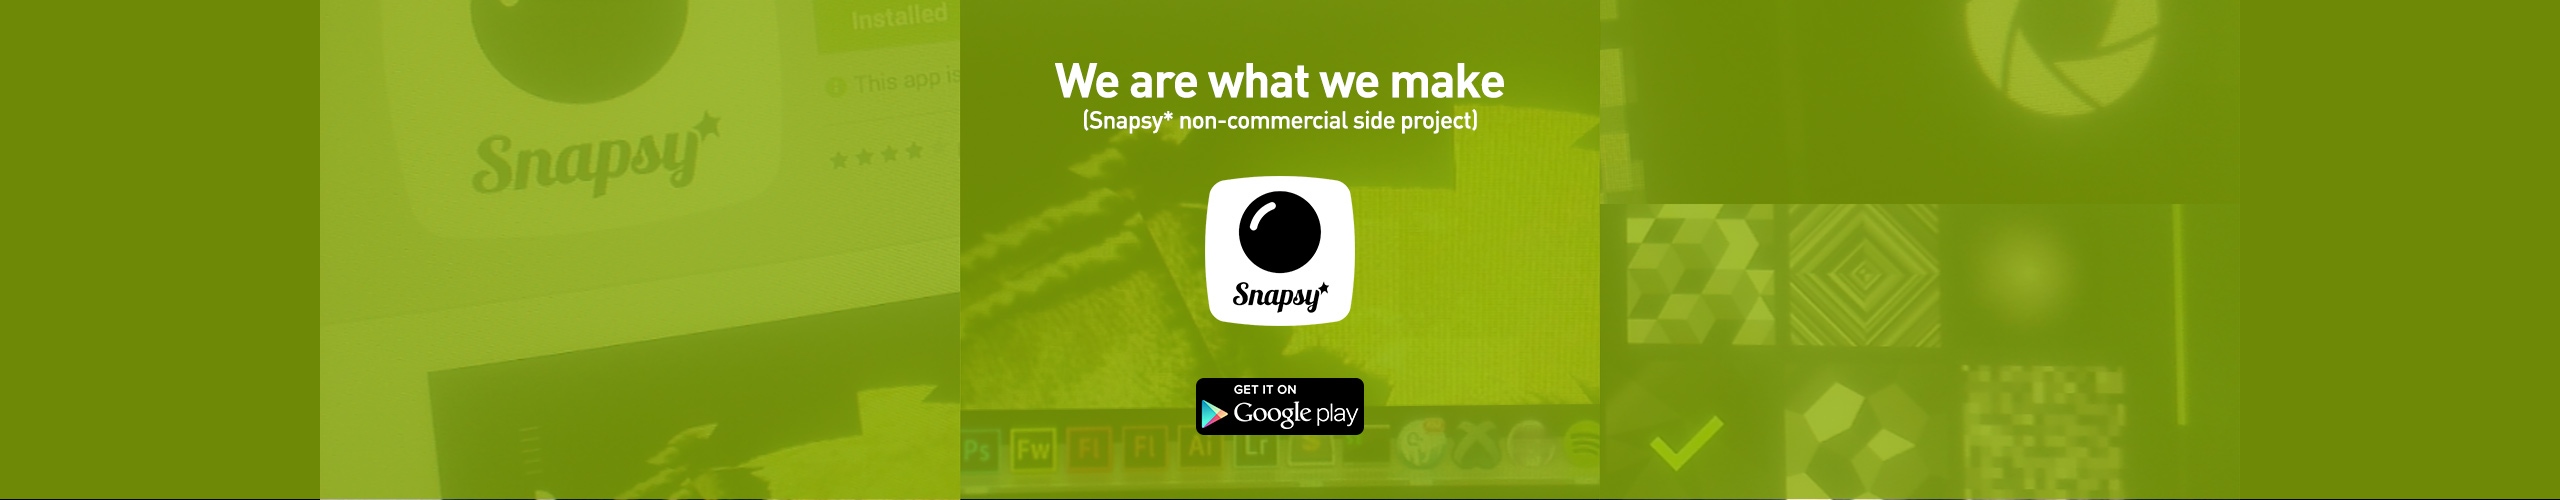 We are what we make - non-commercial side projects: Snapsy